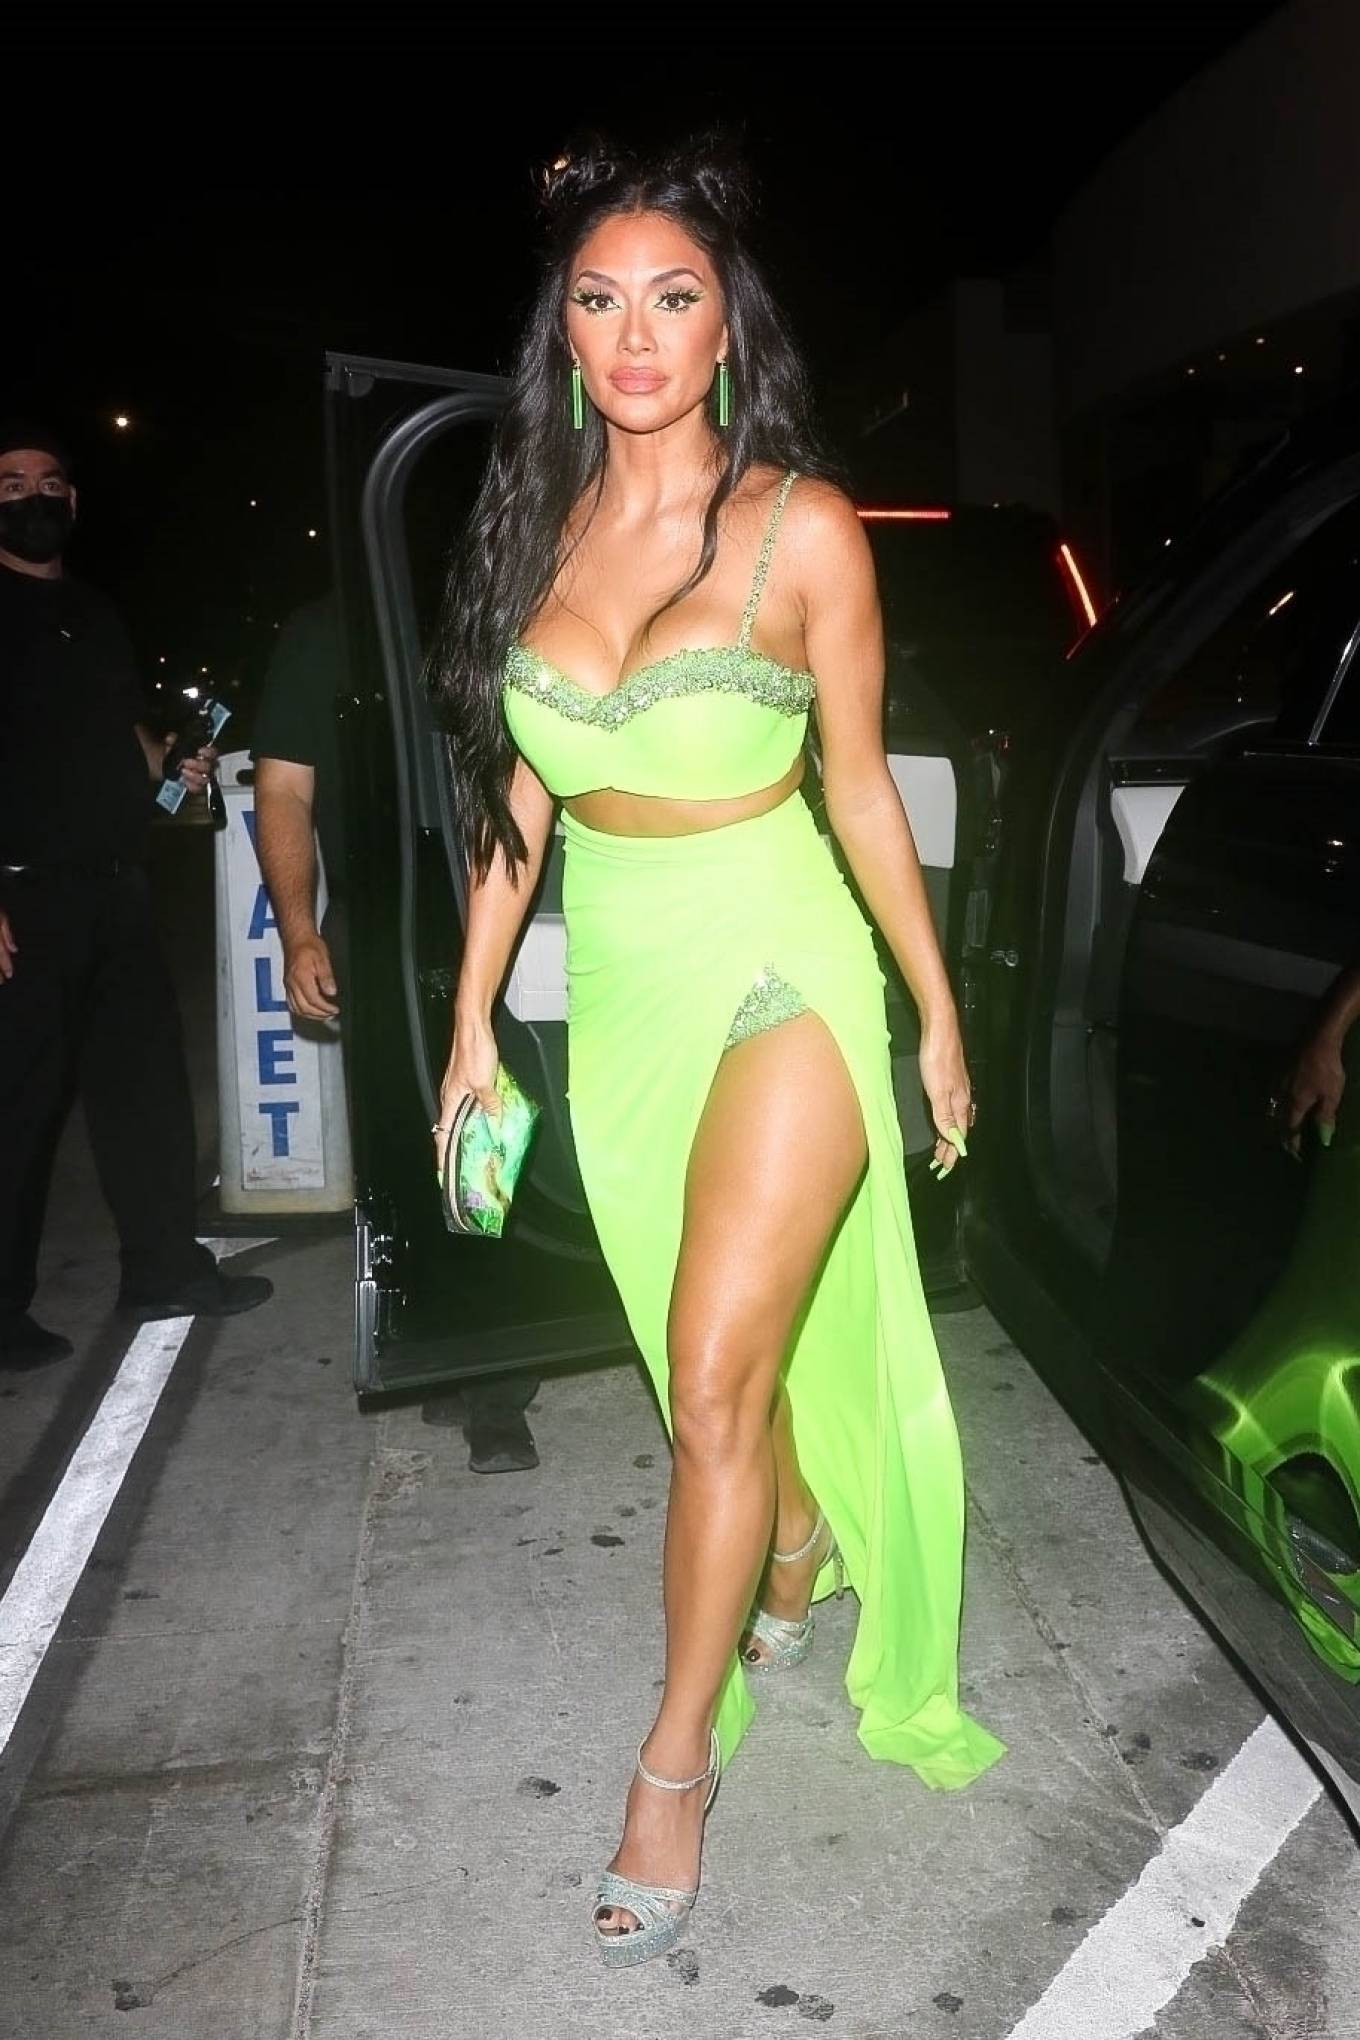 Nicole Scherzinger 2021 : Nicole Scherzinger – Night out in a neon green dress at Catch LA in West Hollywood-12